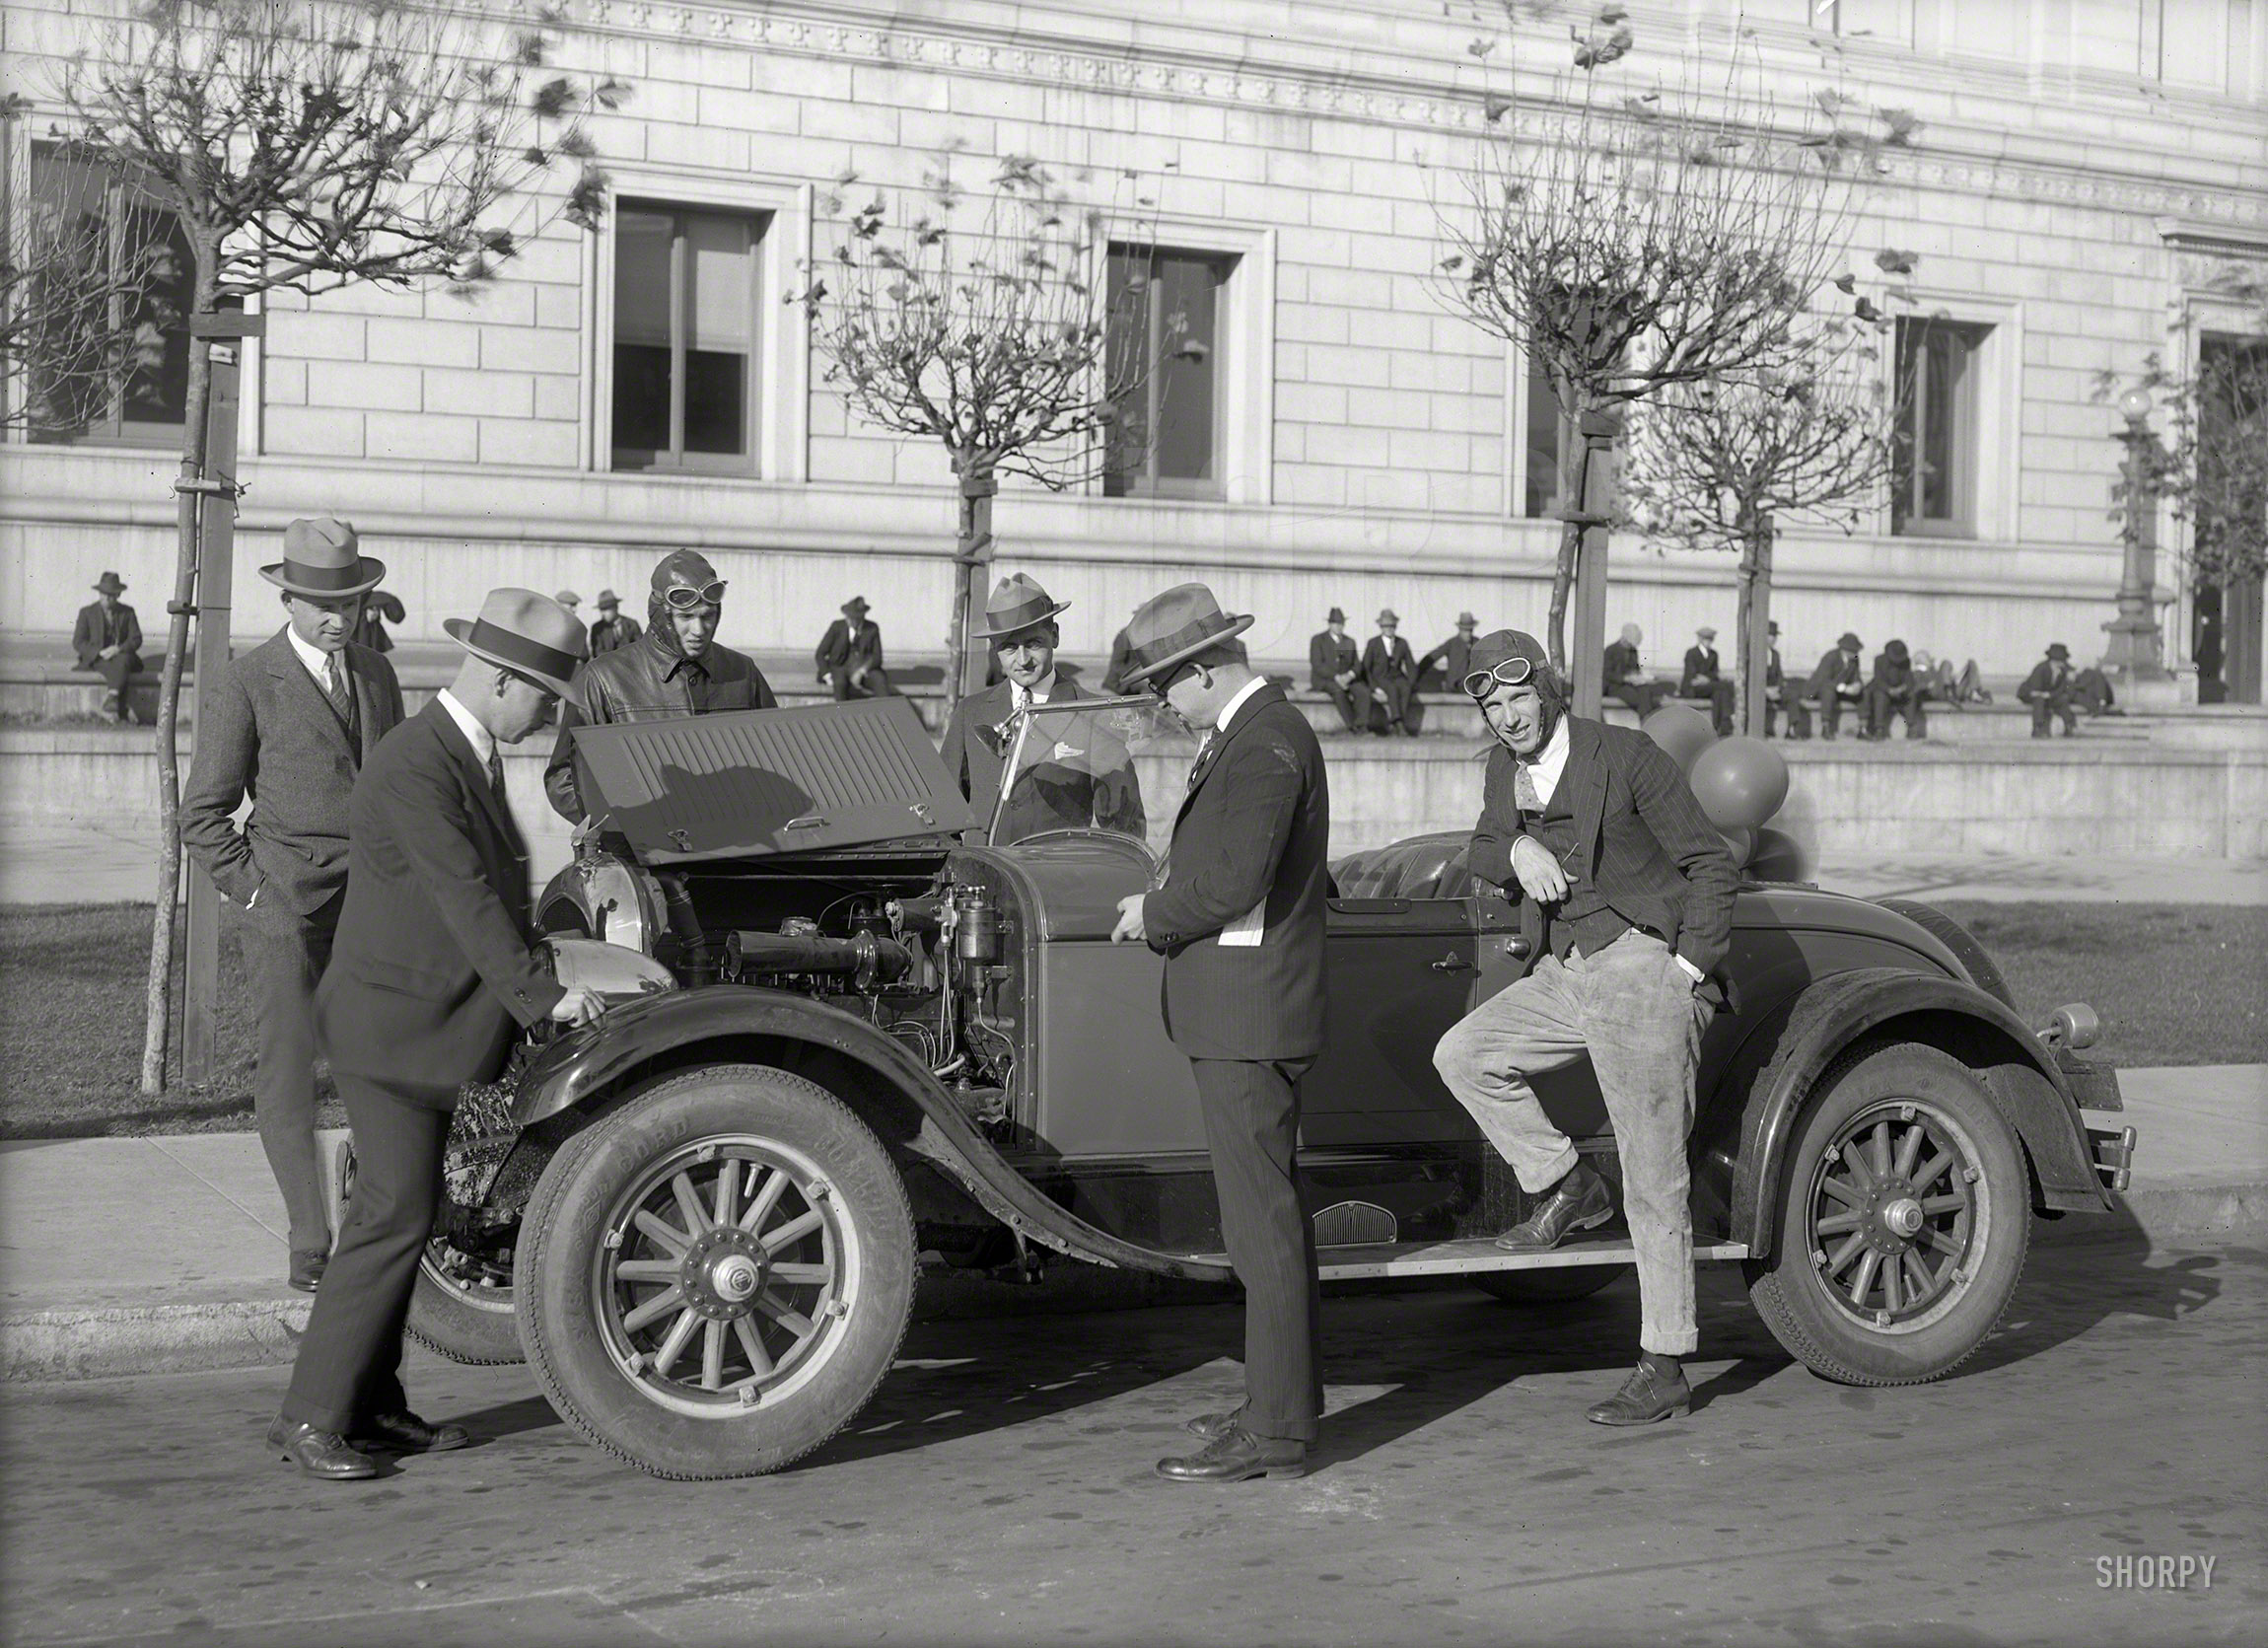 Circa 1927. "Chrysler roadster at San Francisco Public Library with racing drivers." And festive balloons! 5x7 glass negative by Christopher Helin. View full size.